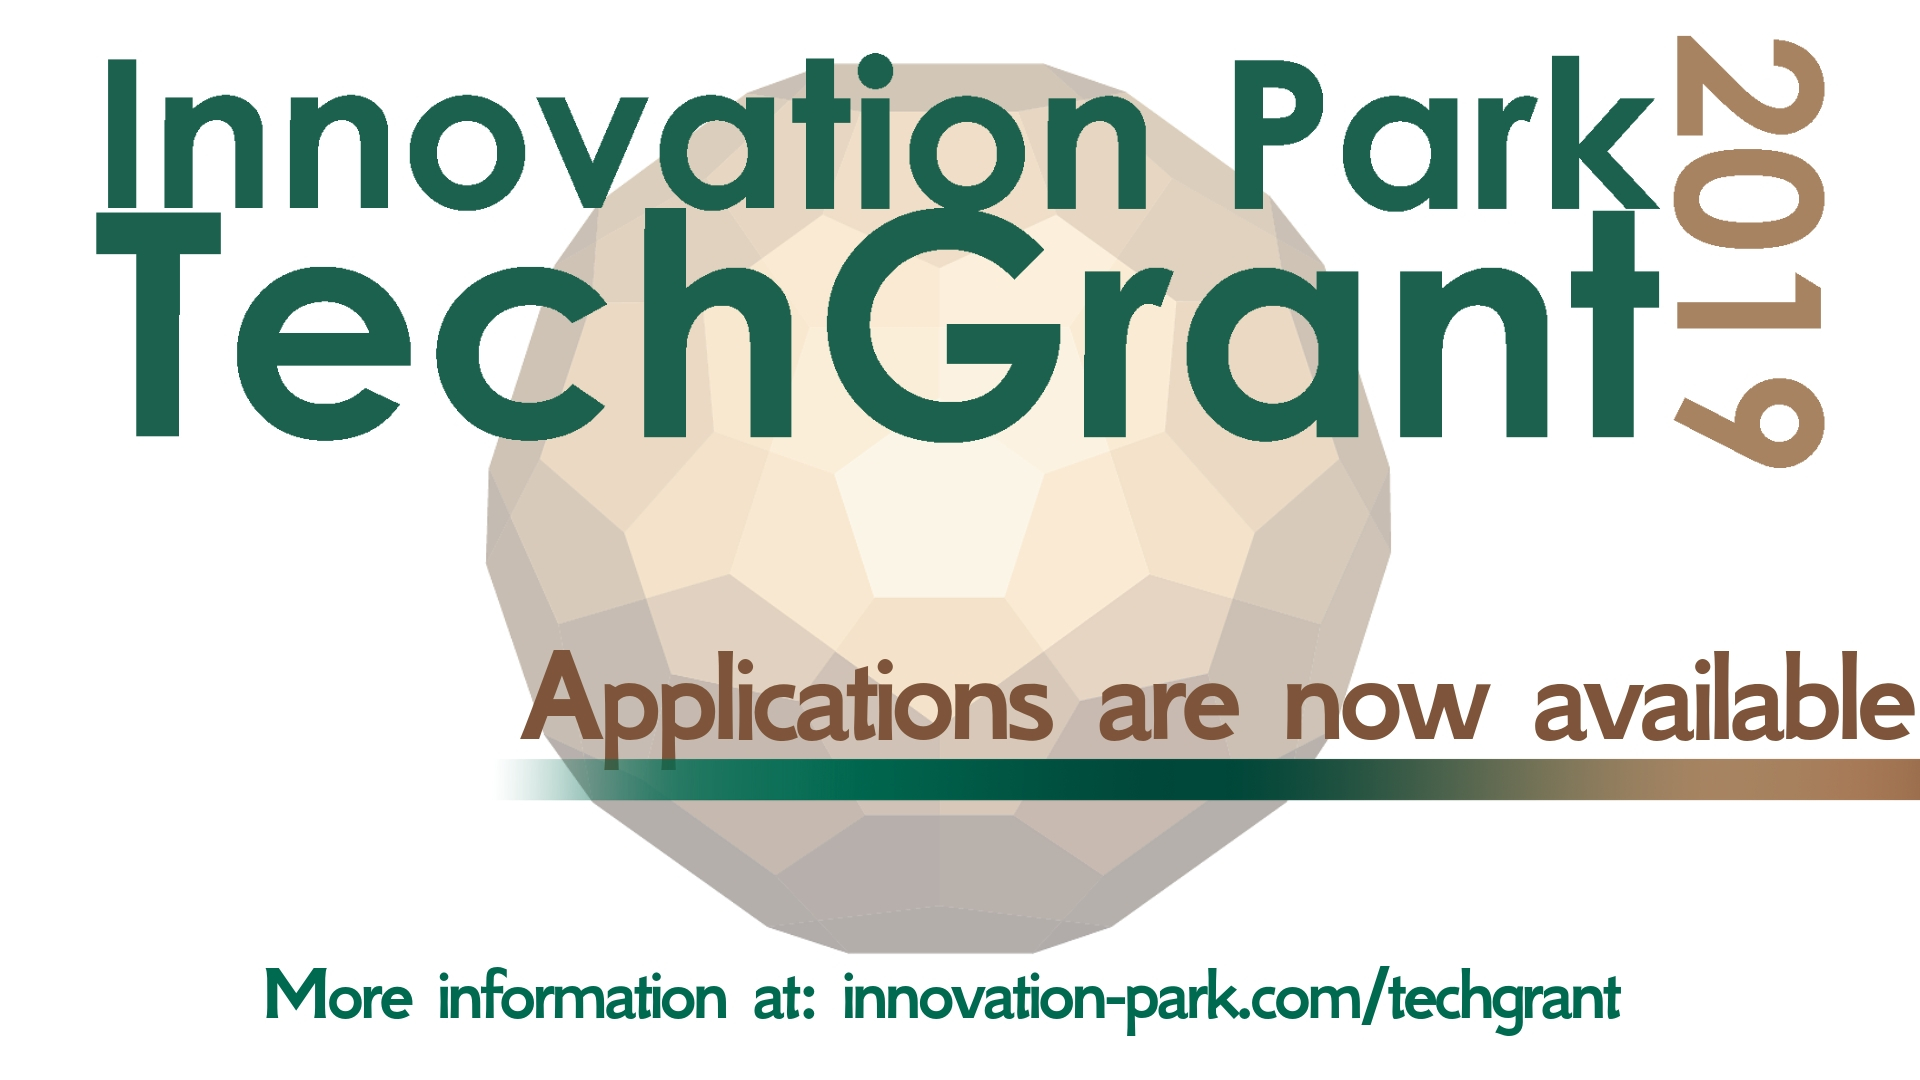 Innovation Park TechGrant 2019 Applications now available